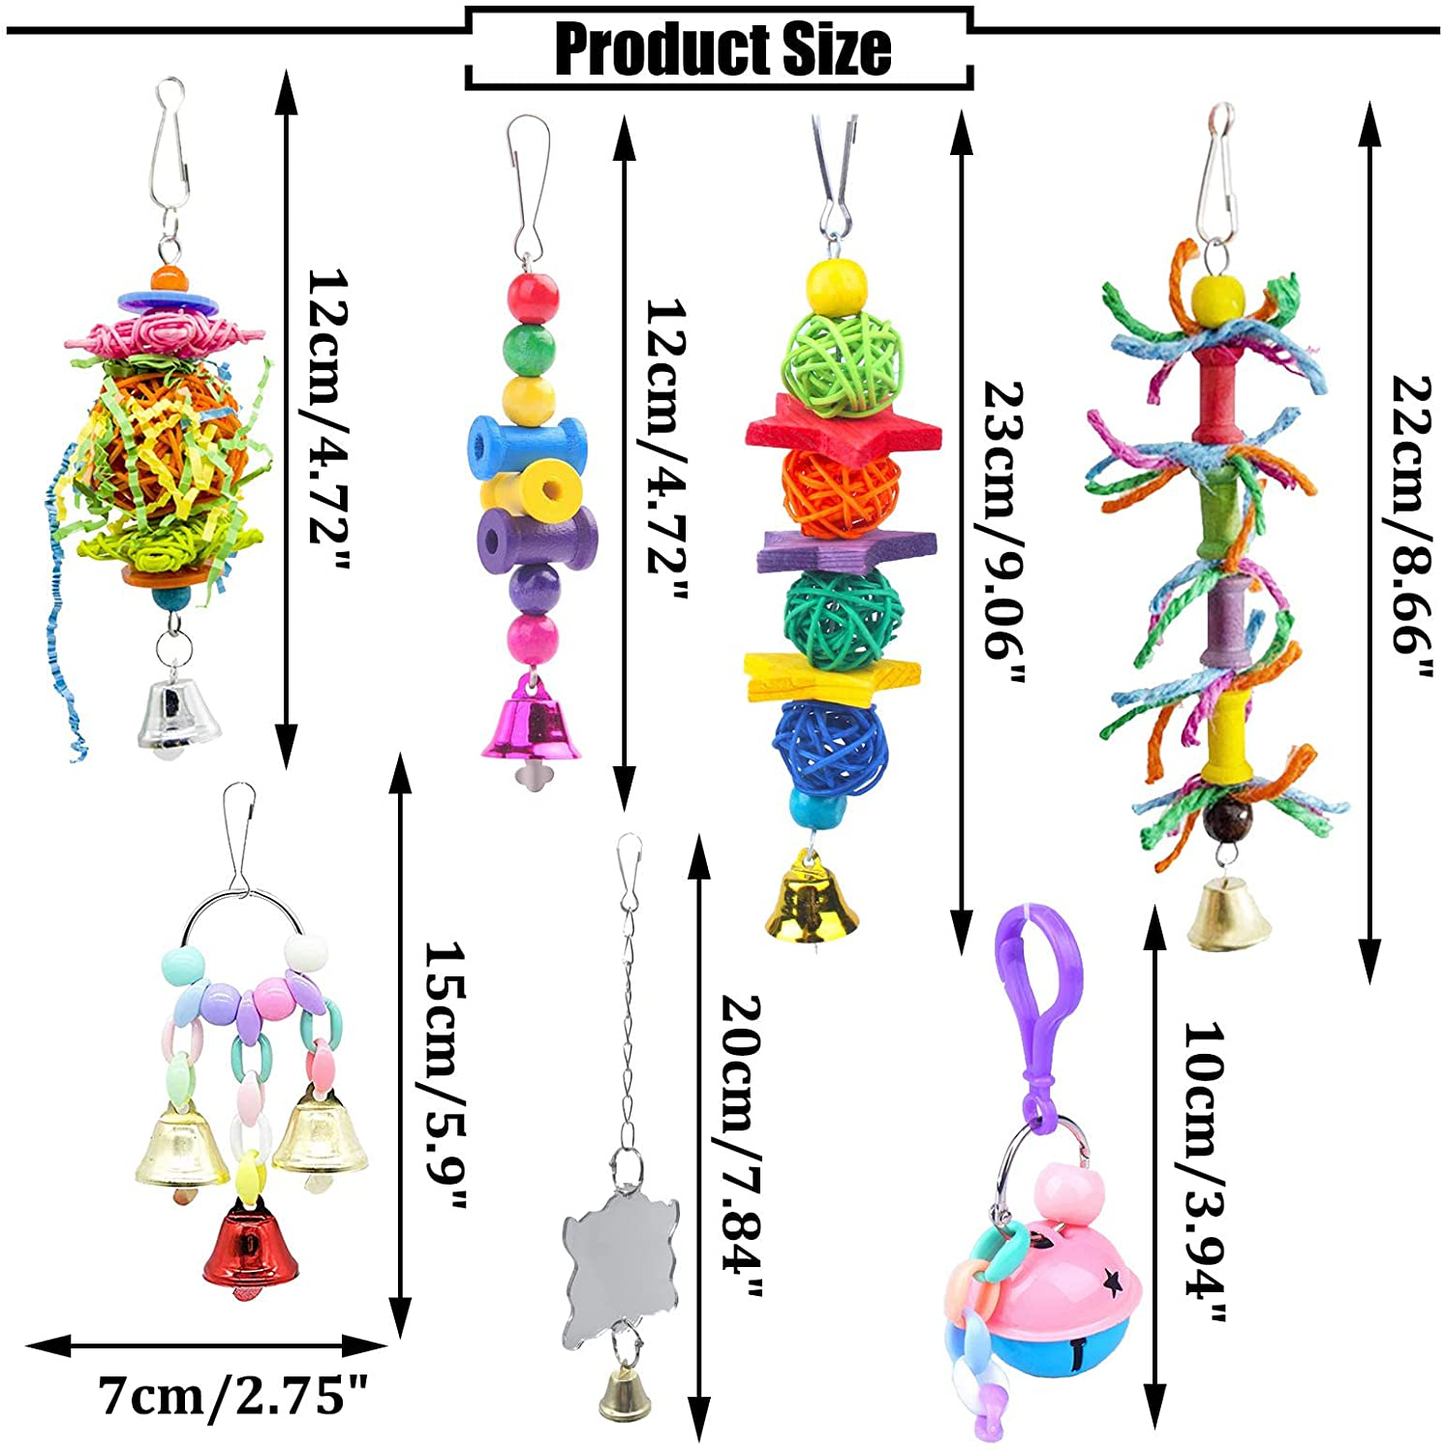 PINVNBY Bird Parrot Swing Chewing Toys Hanging Hammock Bell Pet Birds Cage Toys Wooden Perch with Wood Beads for Small Parakeets, Parrots, Conures, Love Birds, Cockatiels, Macaws, Finches